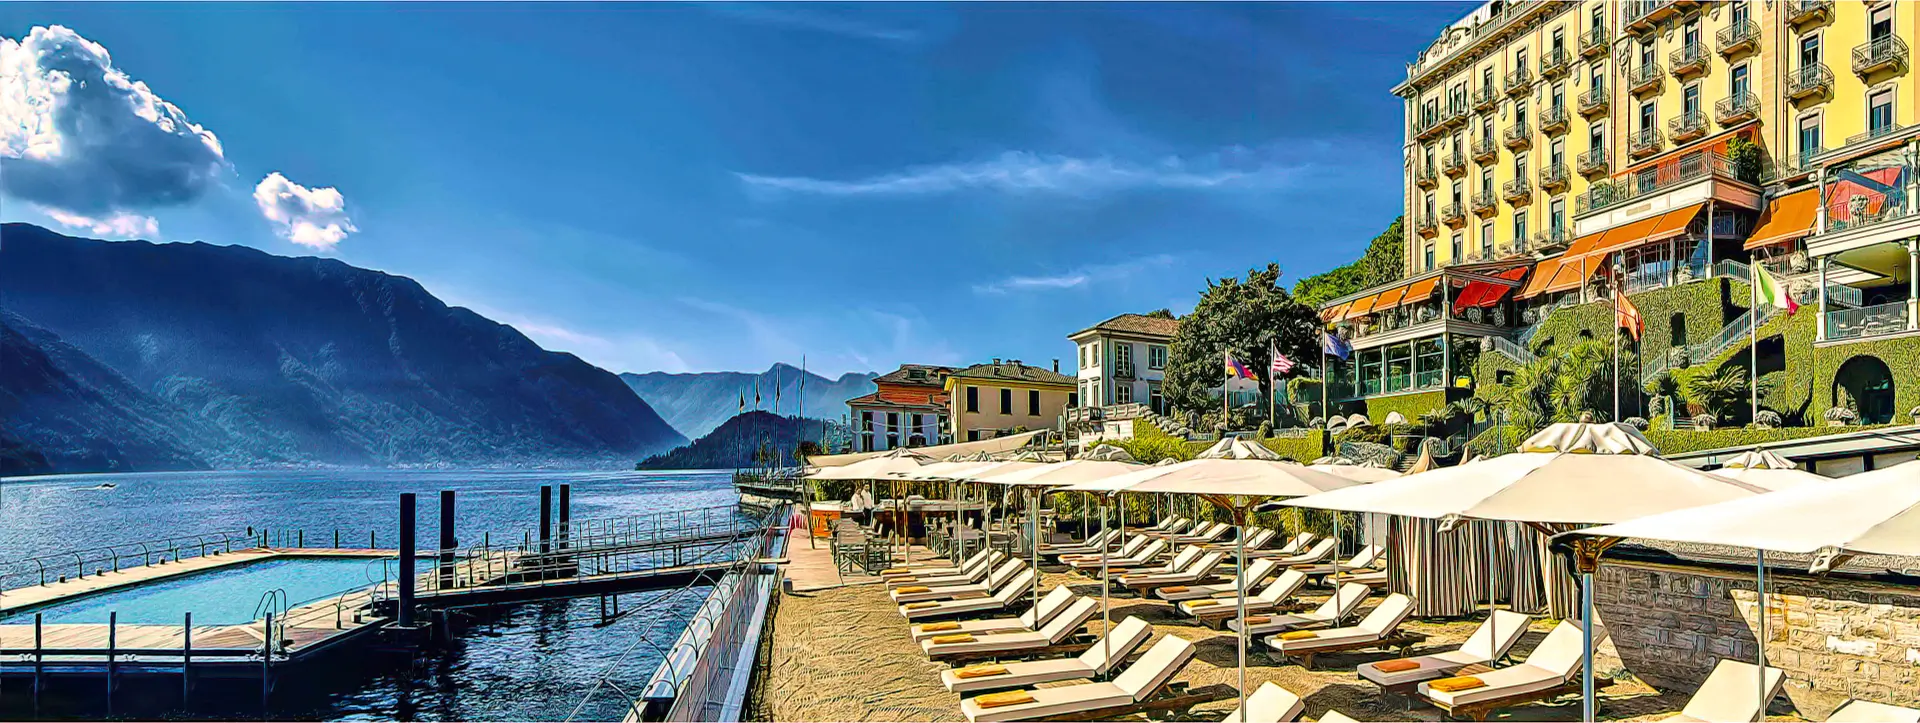 View of Grand Hotel Tremezzo Lake Como's historic palace and picturesque gardens